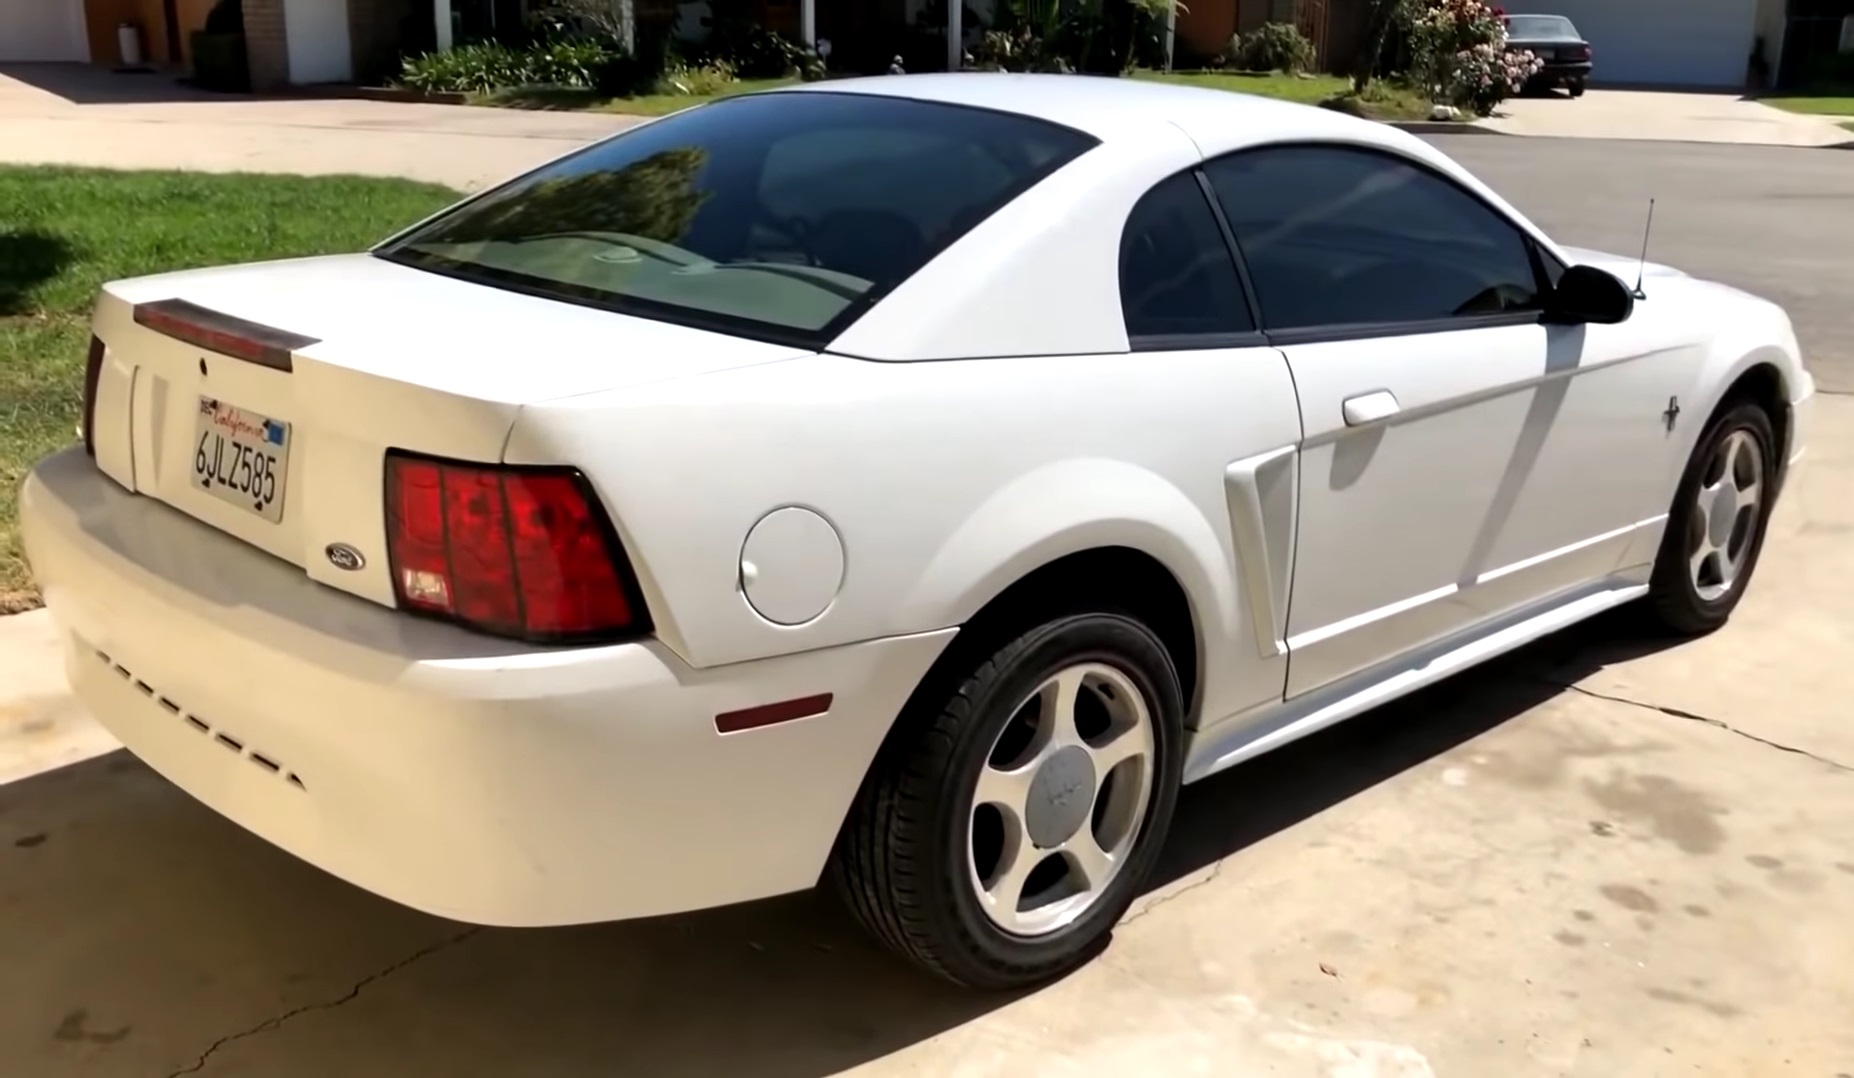 Video: 2002 Ford Mustang V6 Owner's Review